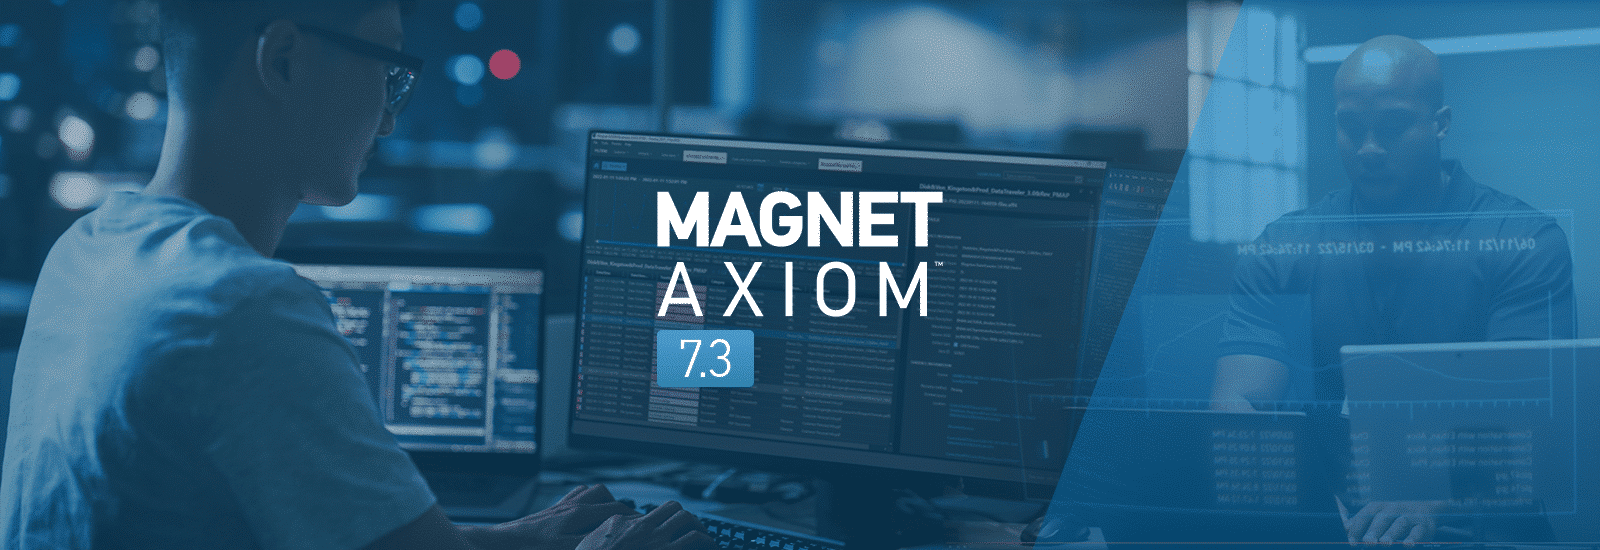 A decorative header for the Magnet AXIOM 7.3 release